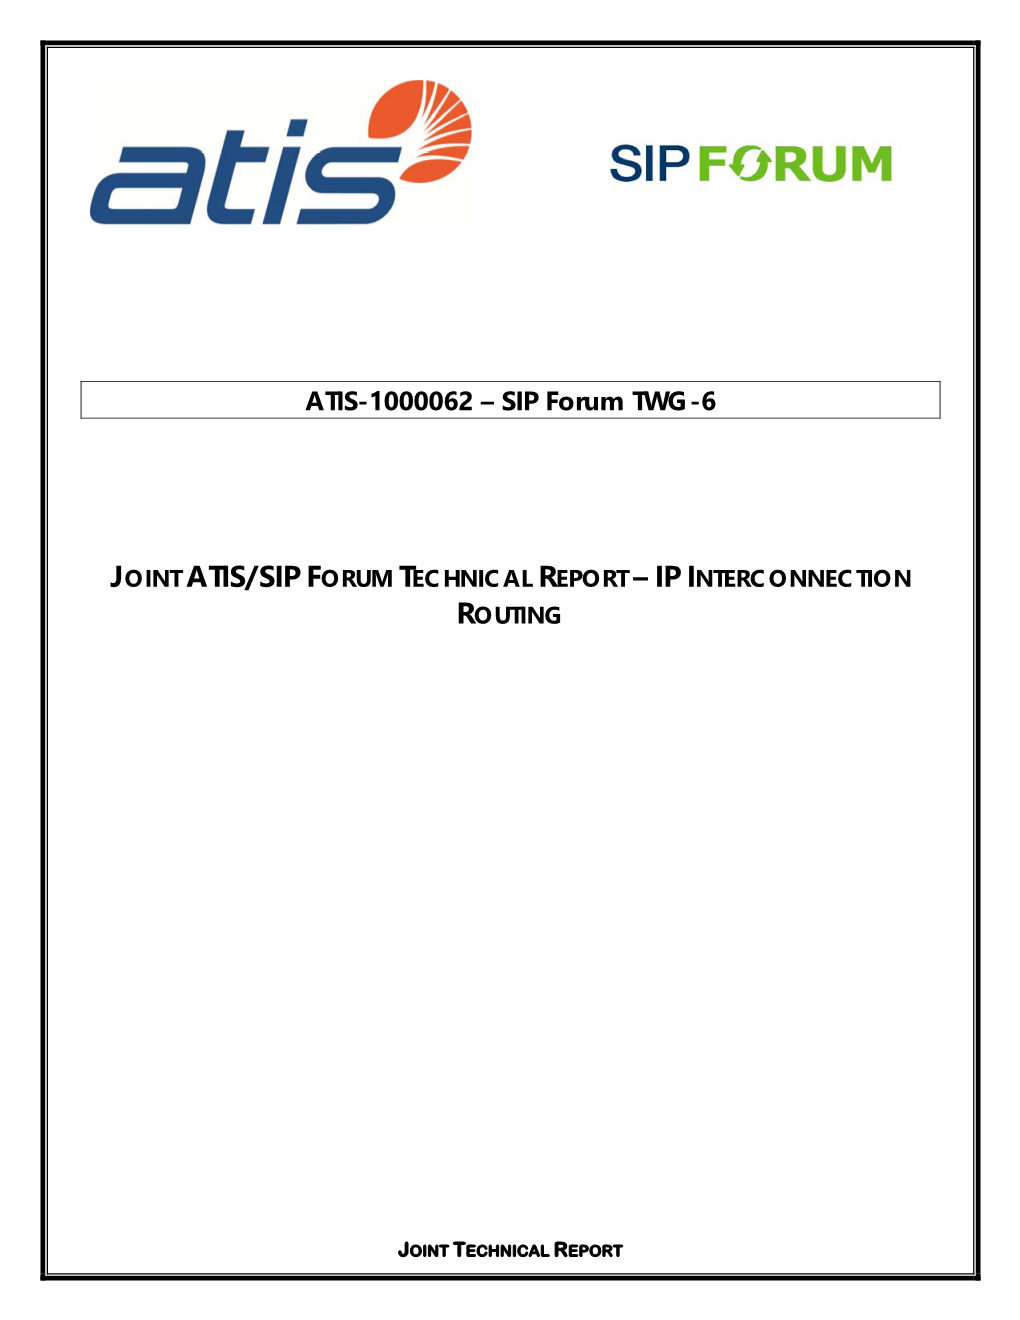 Joint Atis/Sip Forum Technical Report – Ip Interconnection Routing